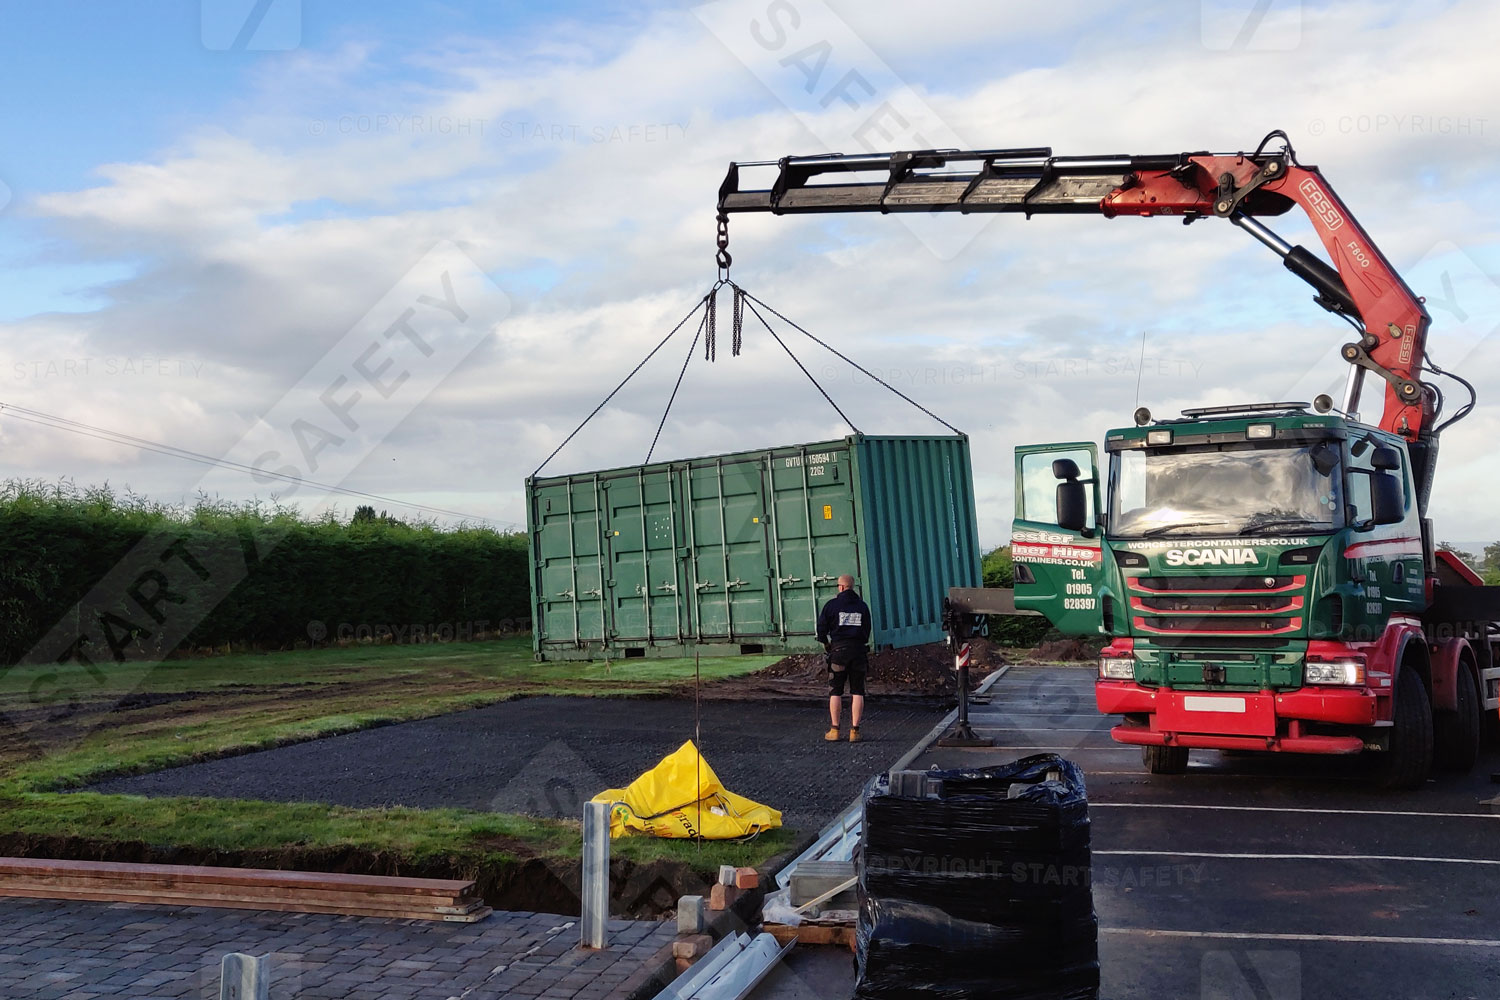 Geogrid base installed ready for shipping container storage